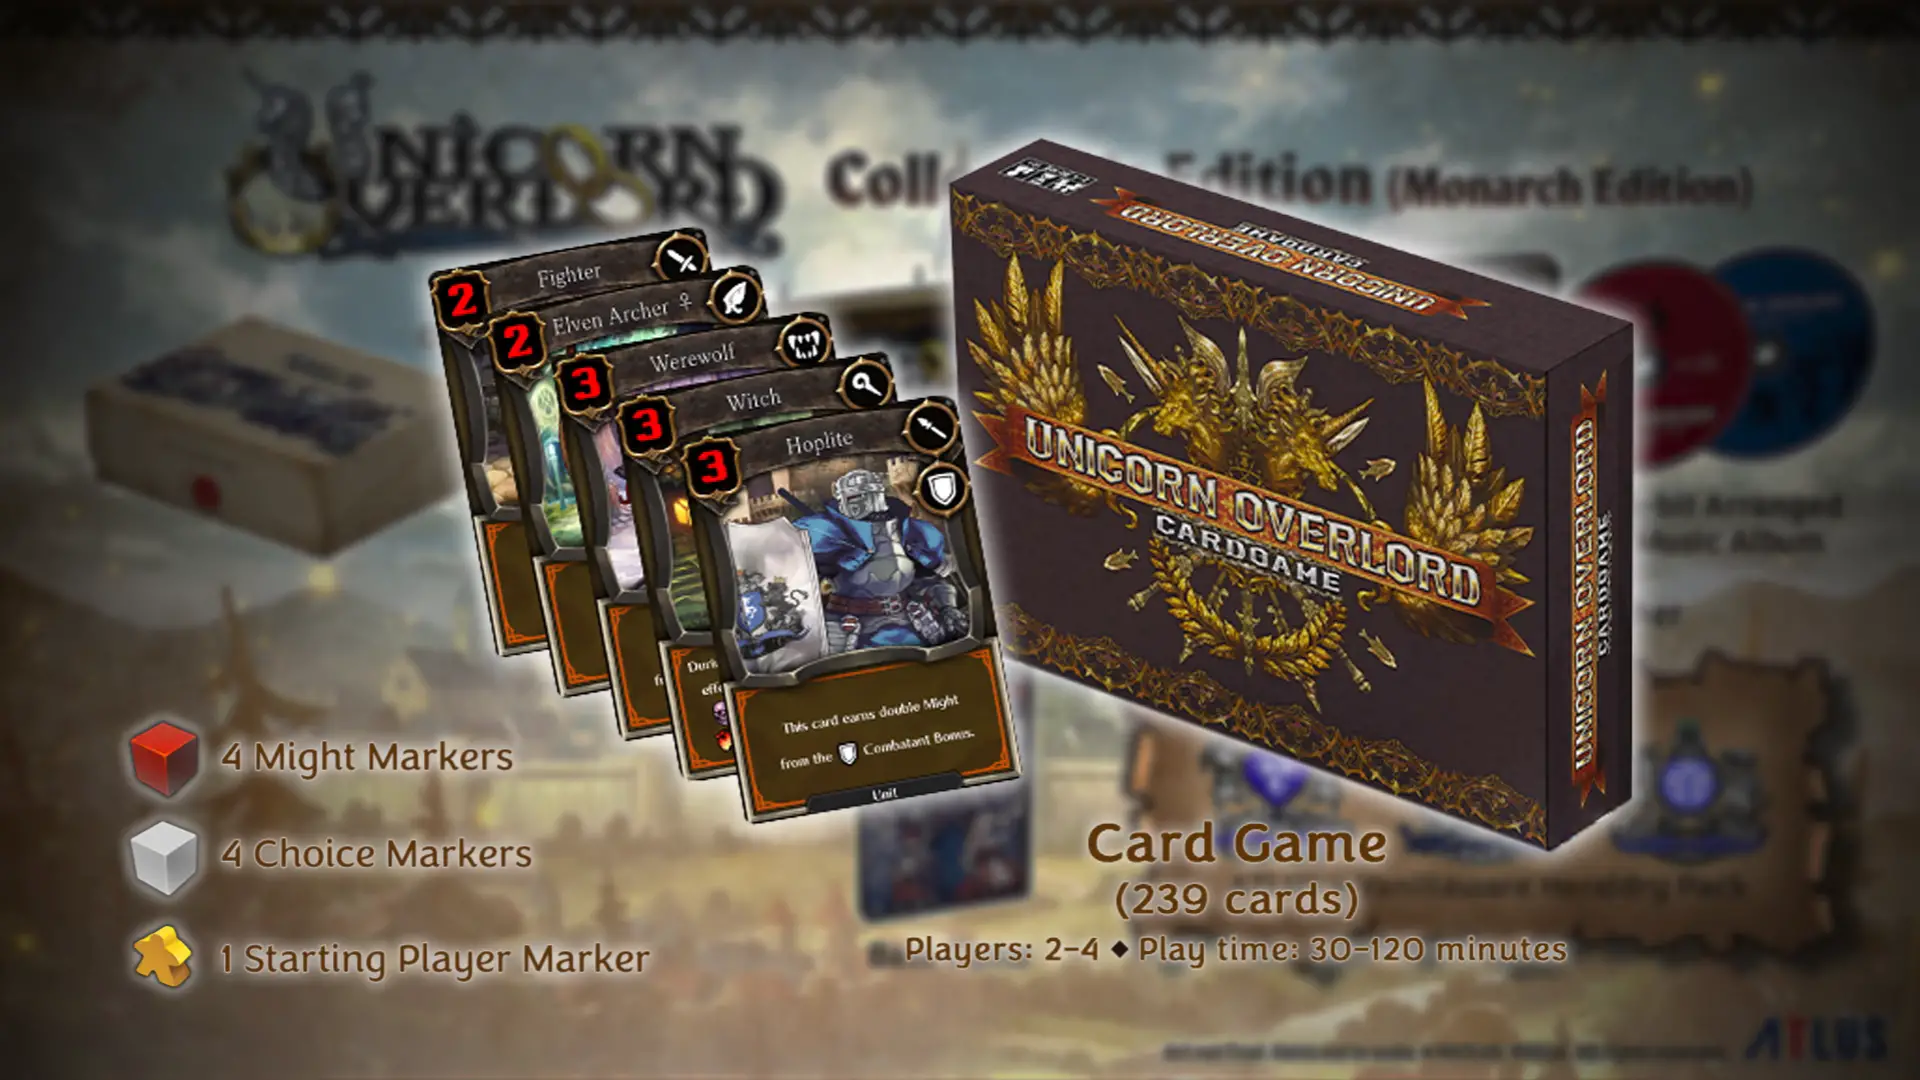 New Unicorn Overlord Trailer Details Real-Life Card Game Included in Collector’s Edition